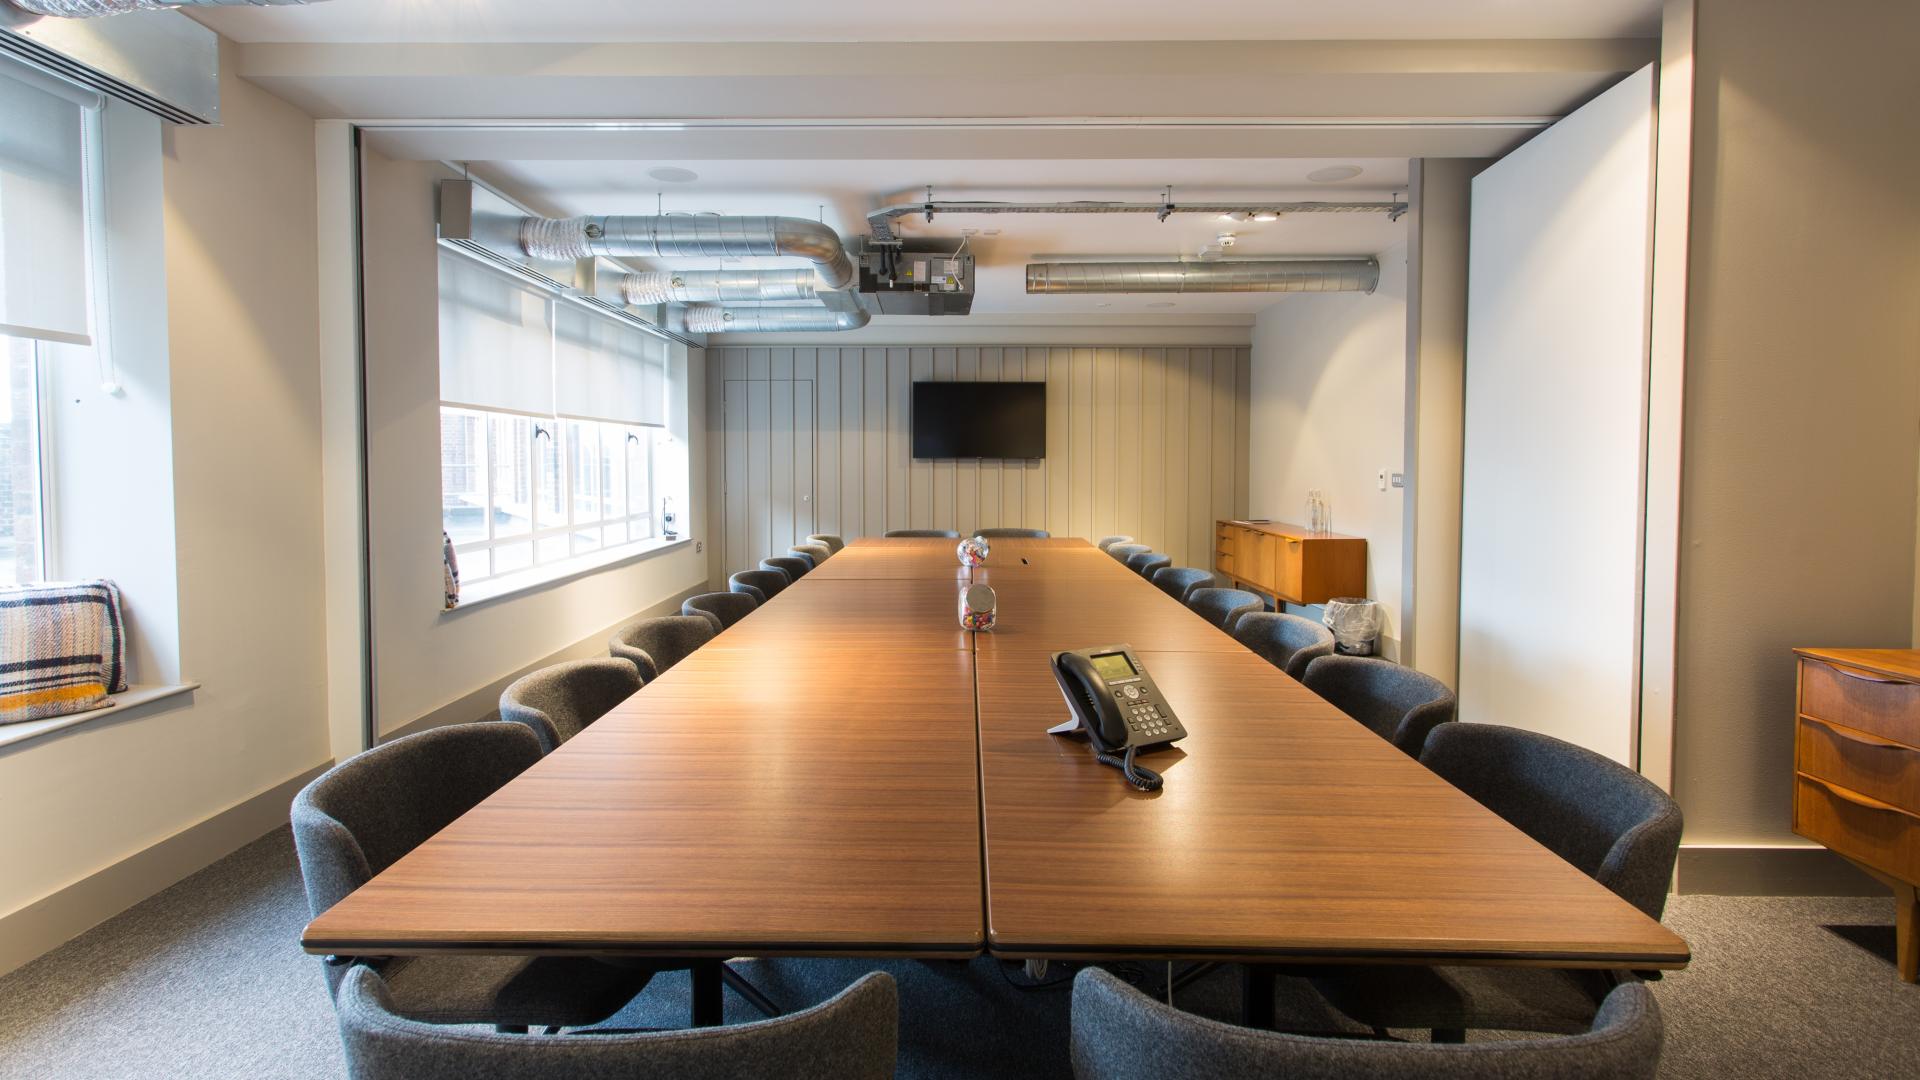 Find your Meeting Room in Bristol